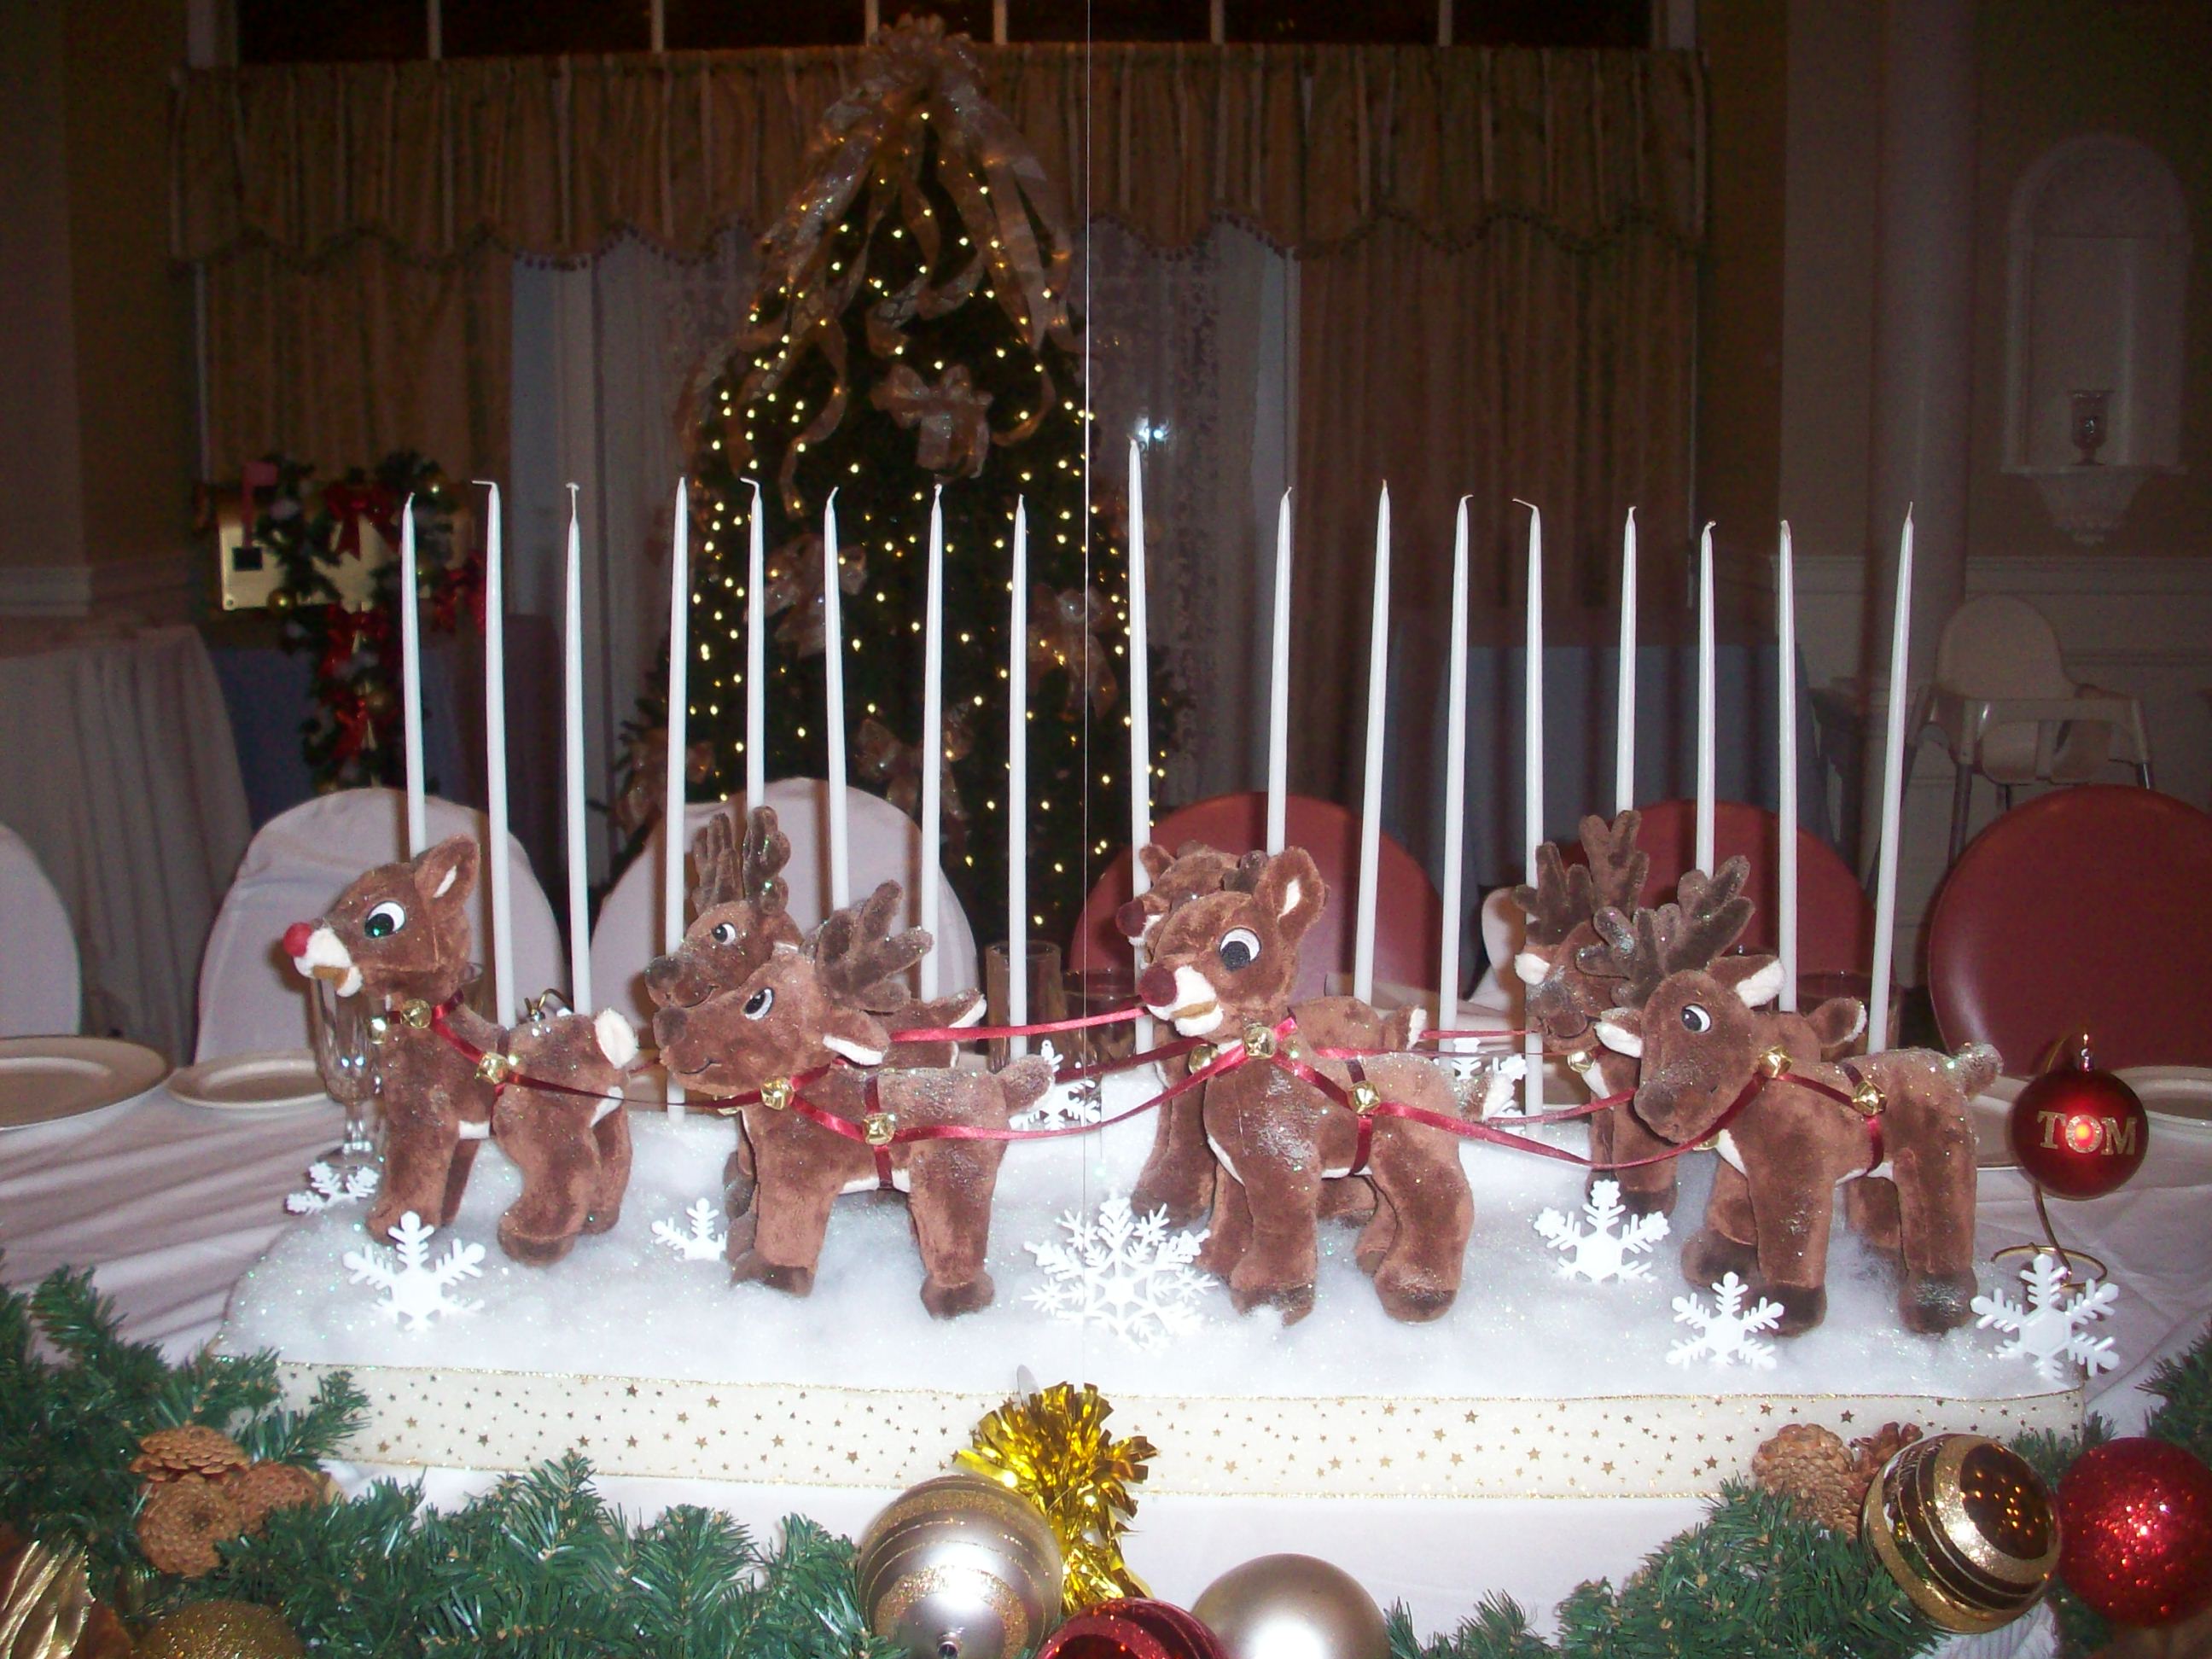 Reindeer centerpiece with candles